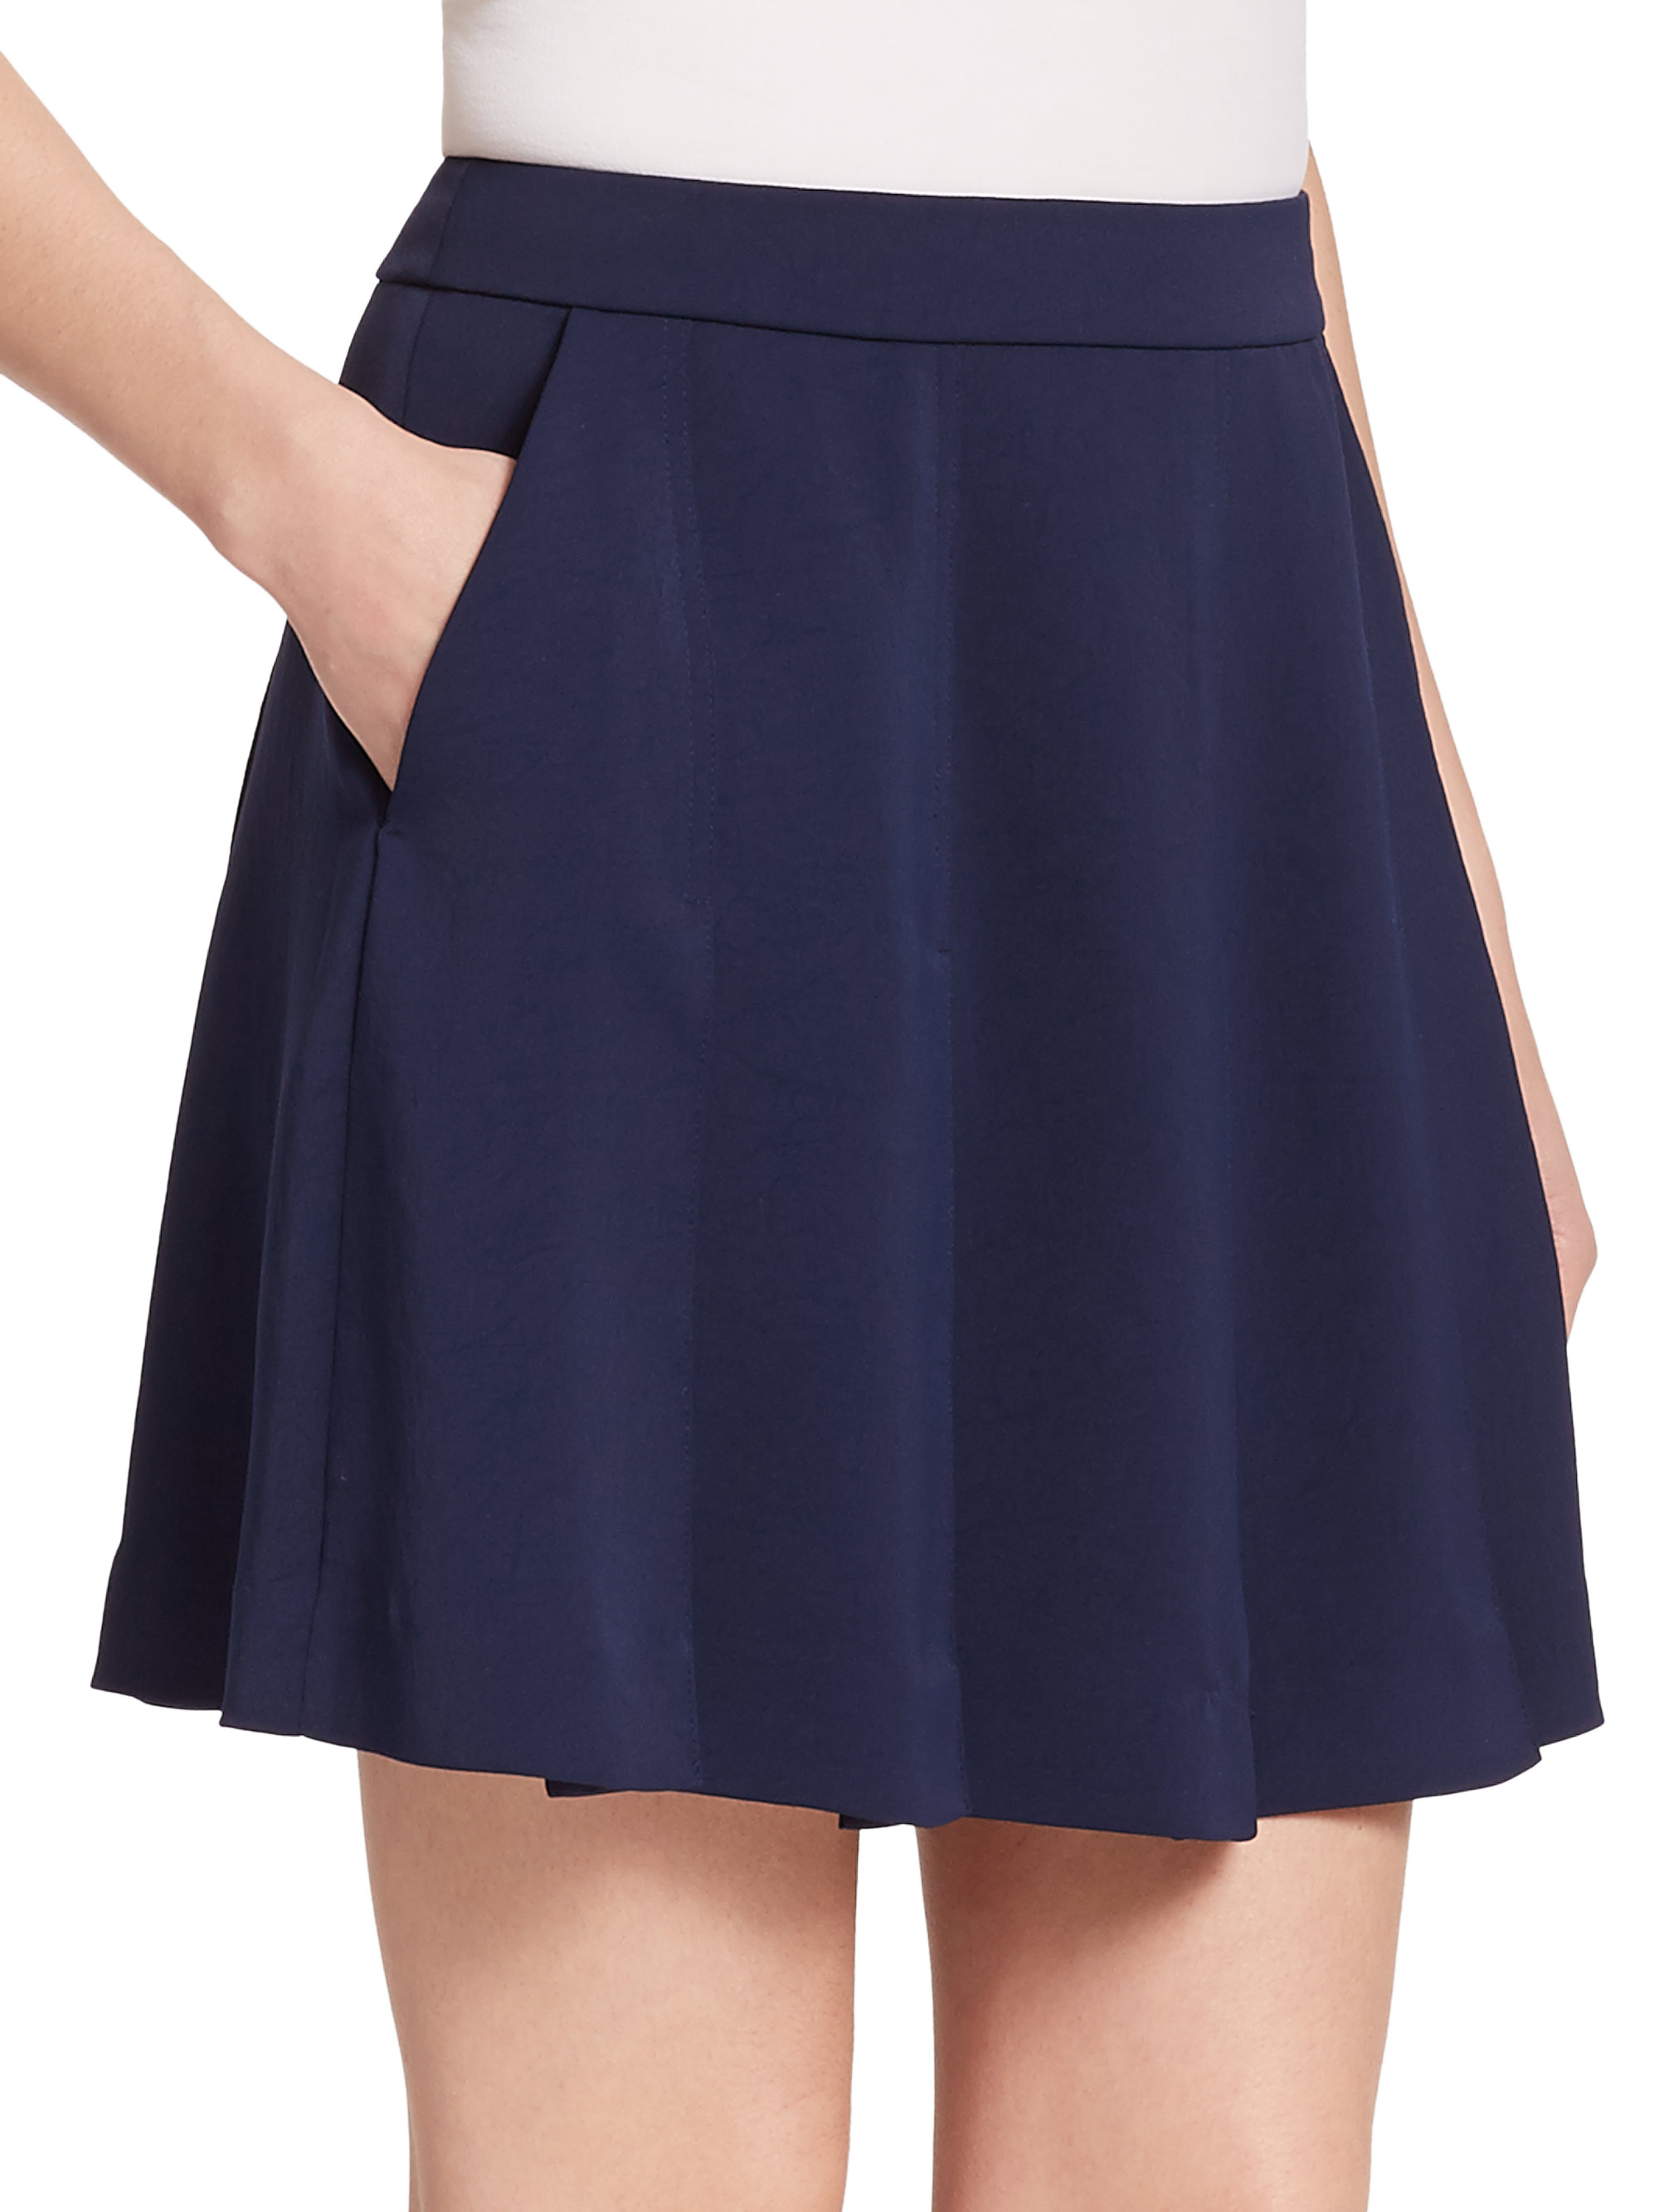 Lyst - Vince Pleated Skirt in Blue